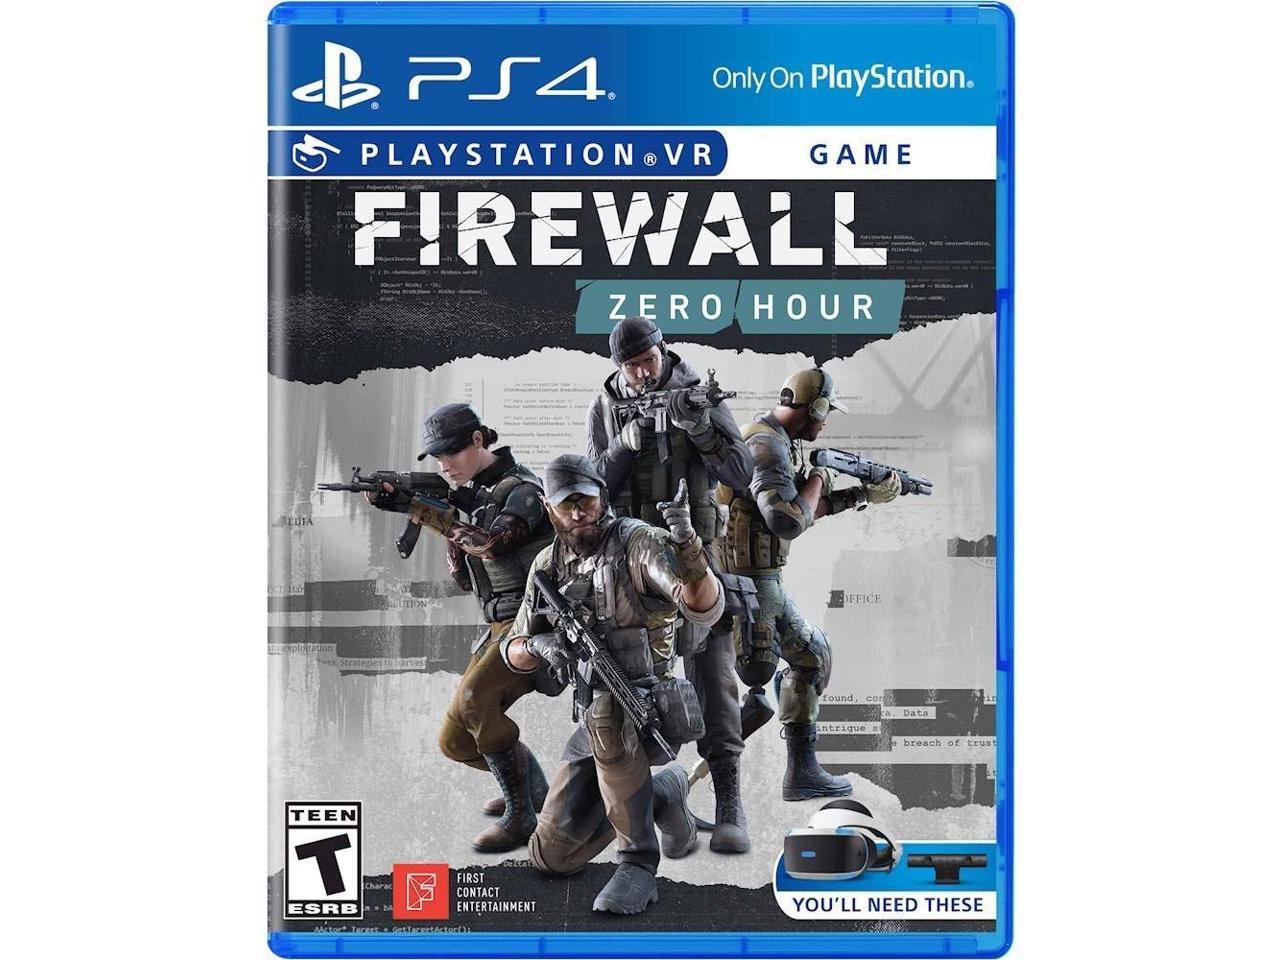 Playstation 4 PSVR FPS Firewall Zero Hour and Aim Controller 